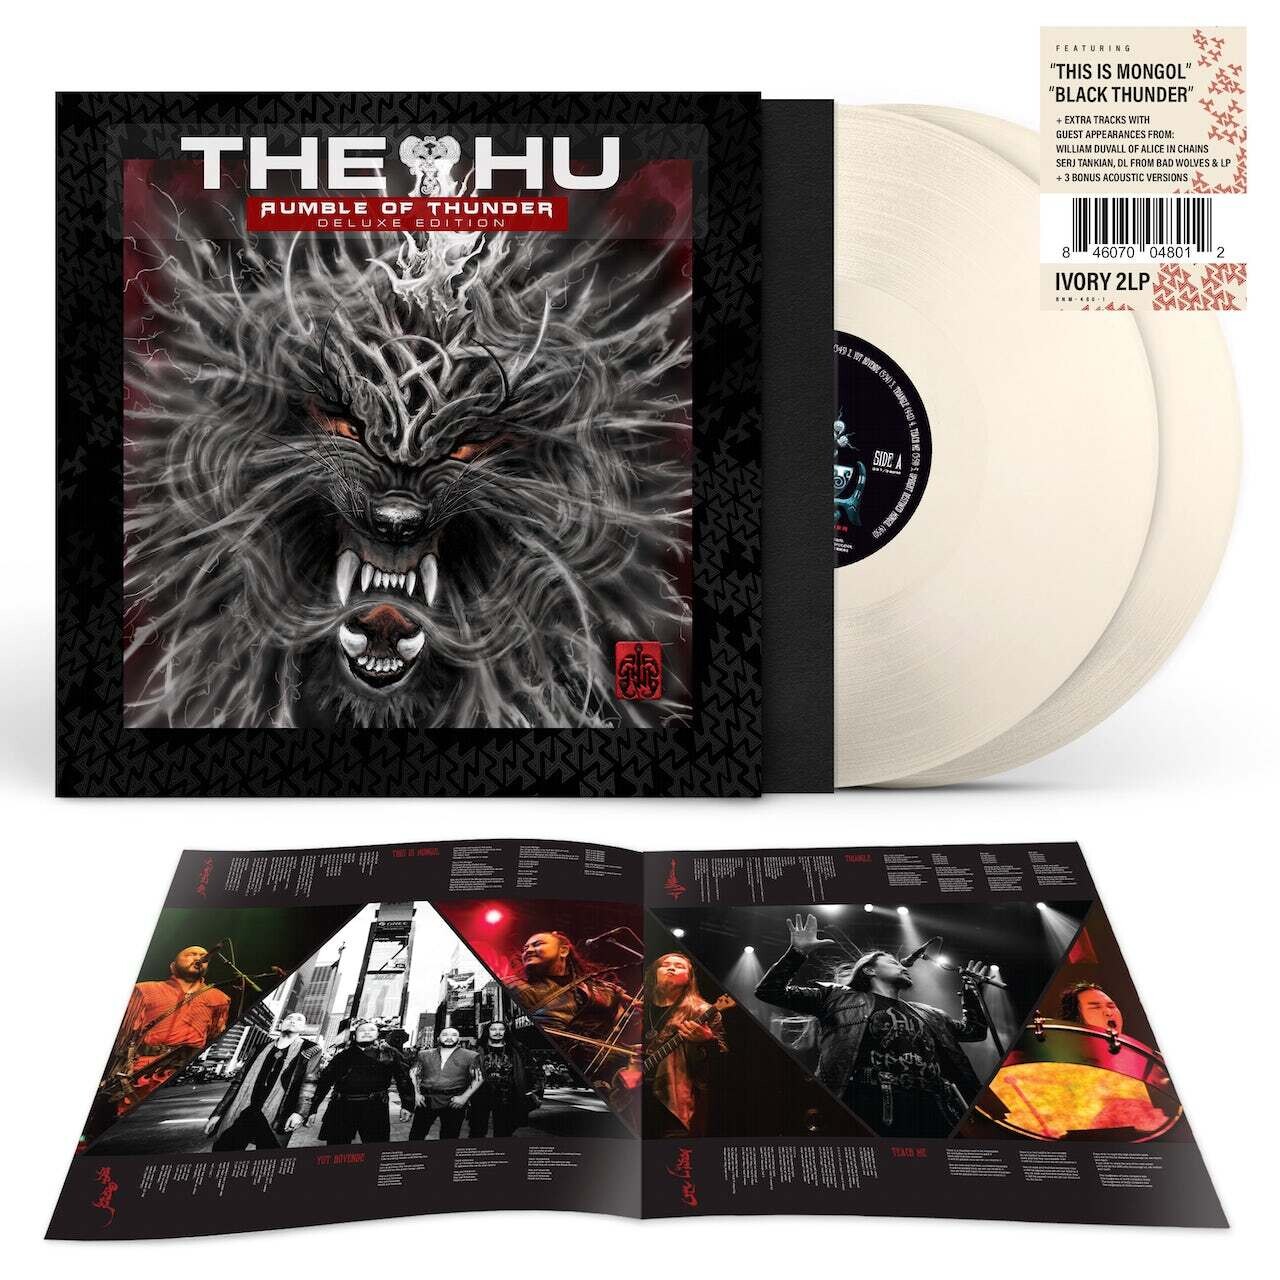 The HU / Rumble of Thunder Deluxe - Ivory